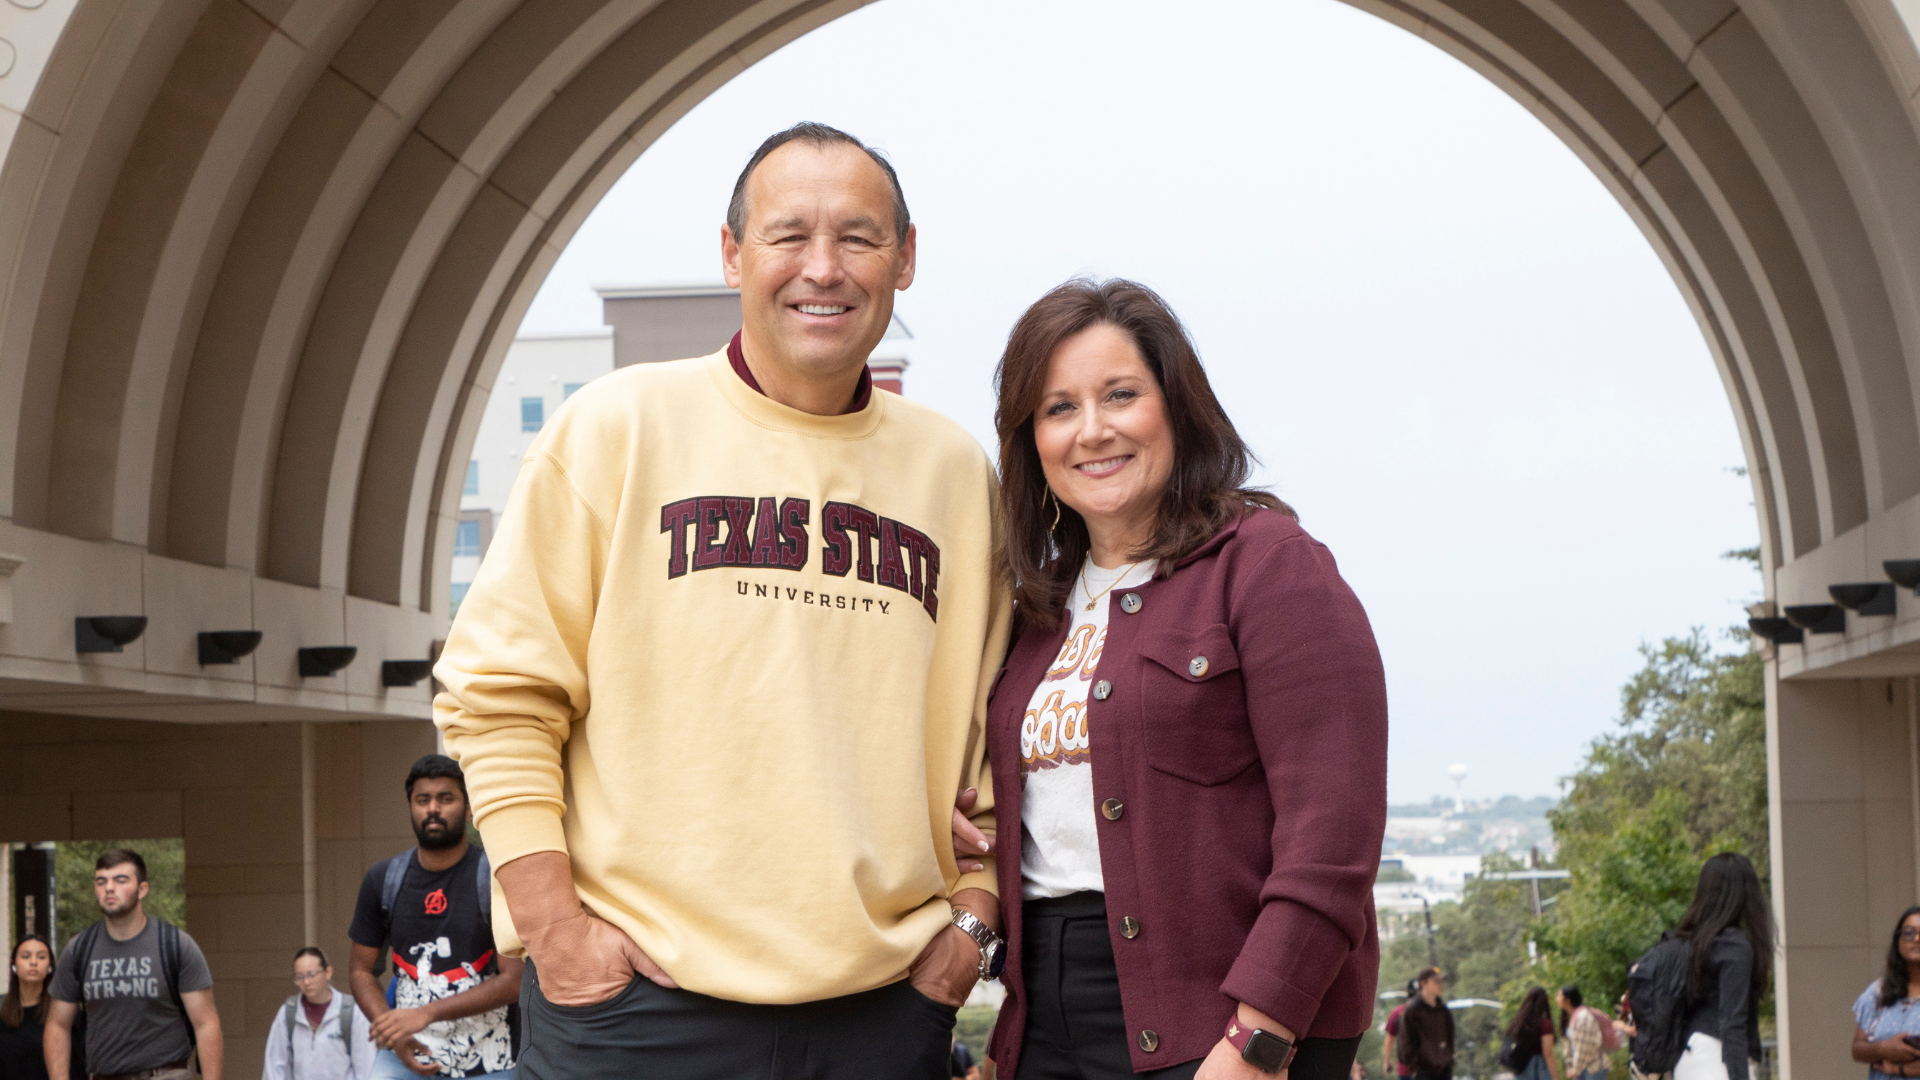 President Damphousse and Beth posing for a photo under the Arches.